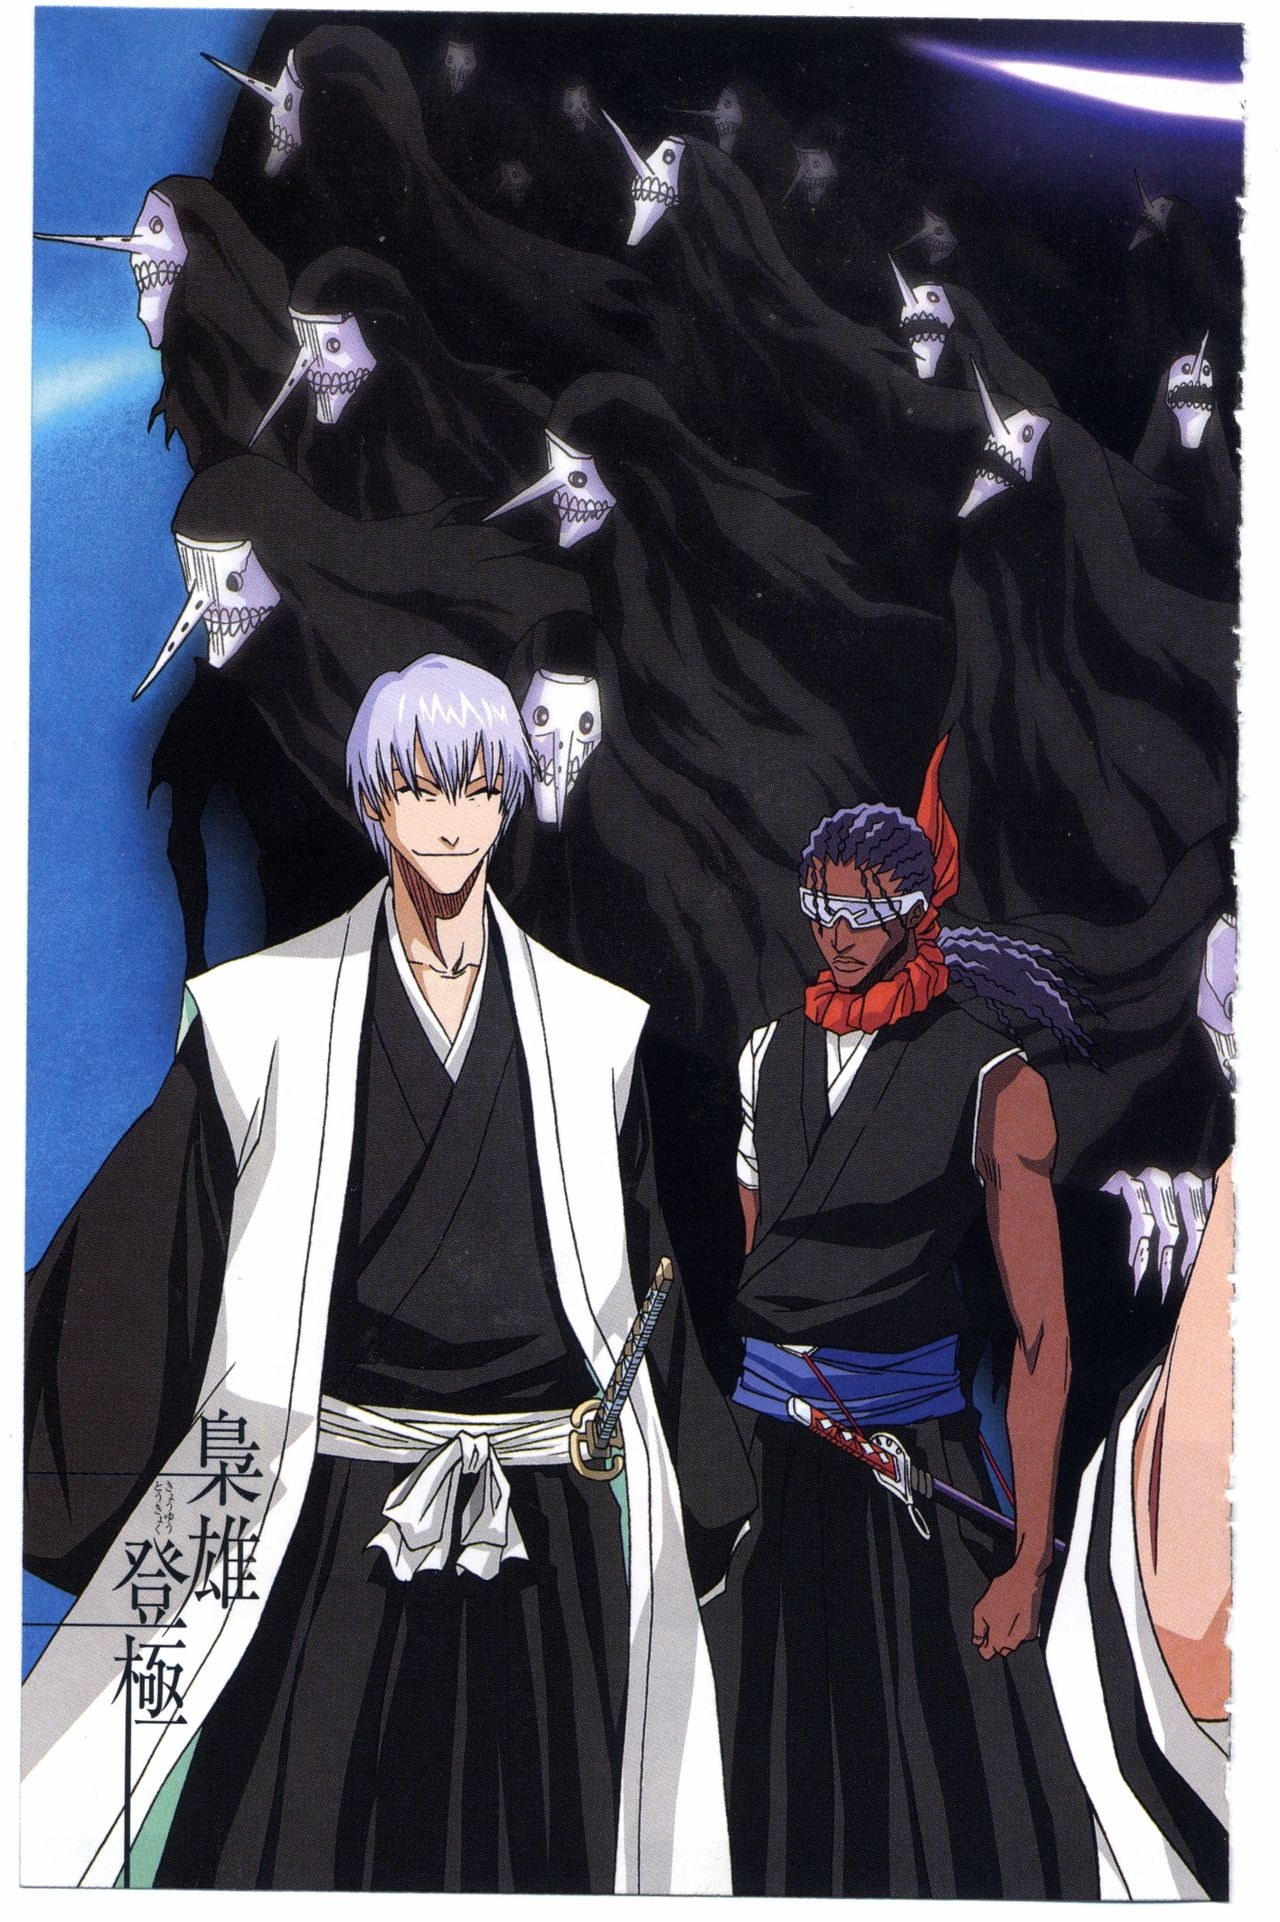 Bleach: Official Animation Book VIBEs 181